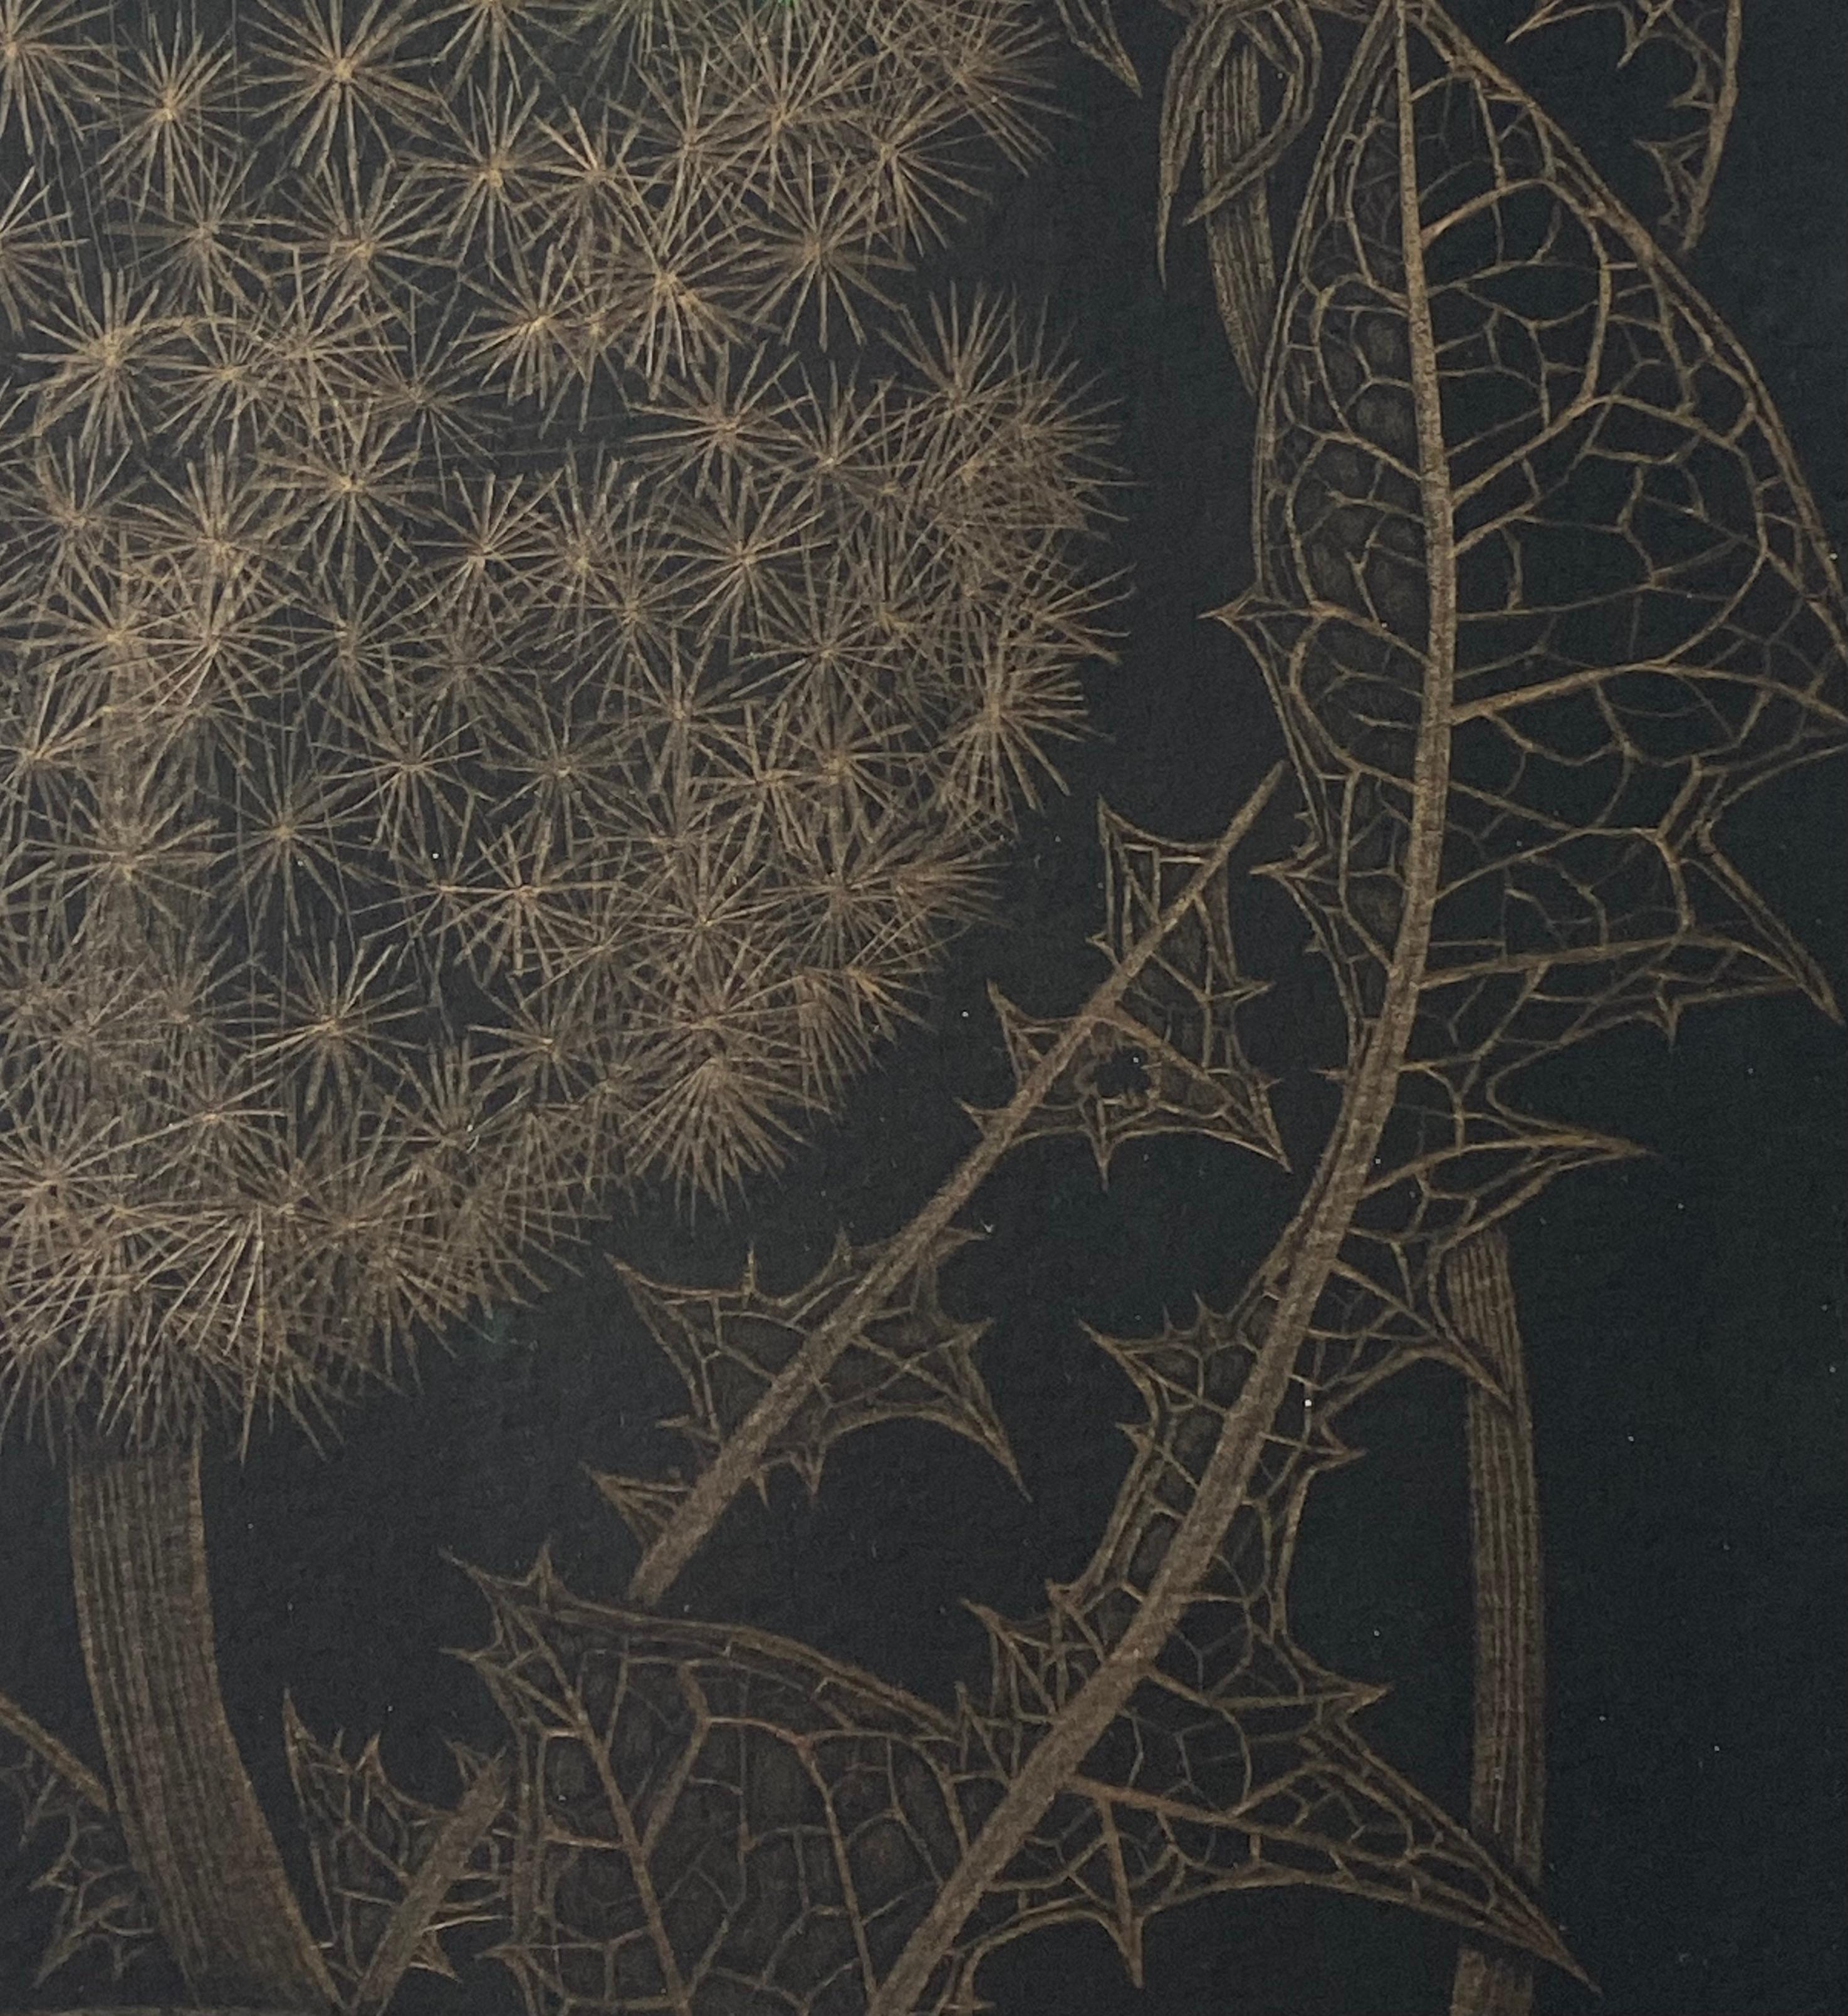 Dandelion with Two Buds, Botanical Drawing on Black Paper Made With 14K Gold 3